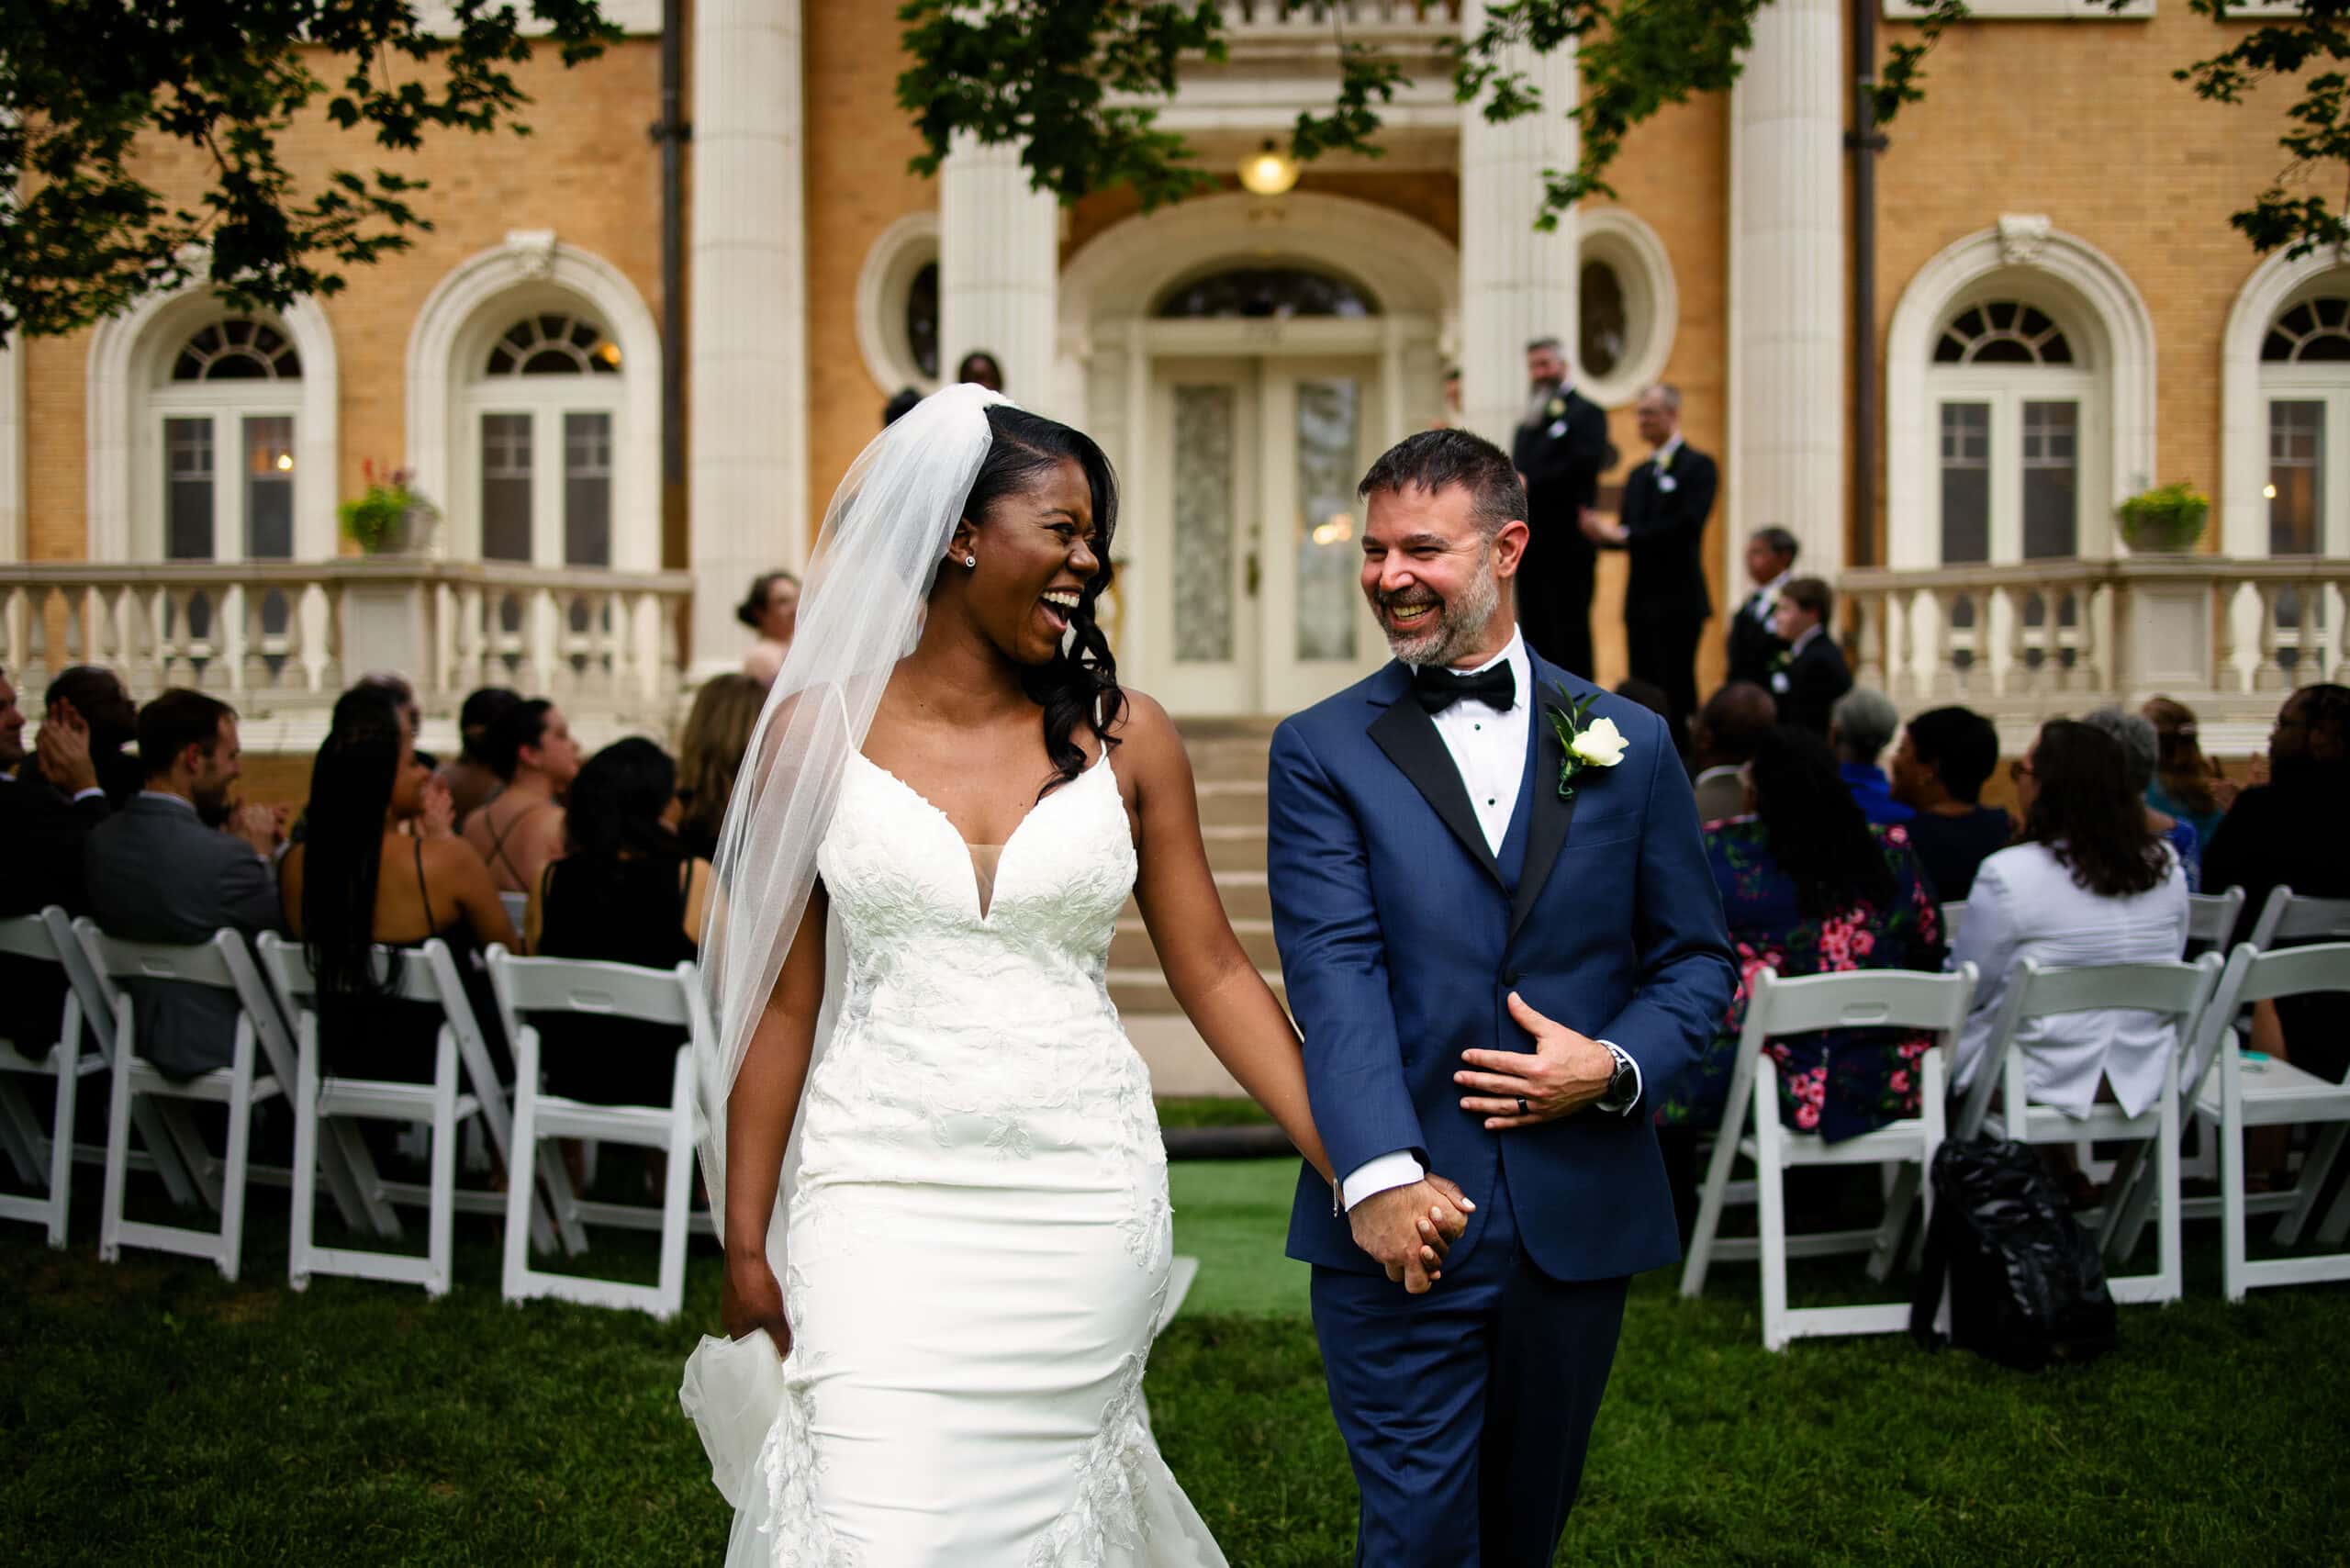 The couple celebrates as they walk down the aisle at Grany Humphrey’s Mansion